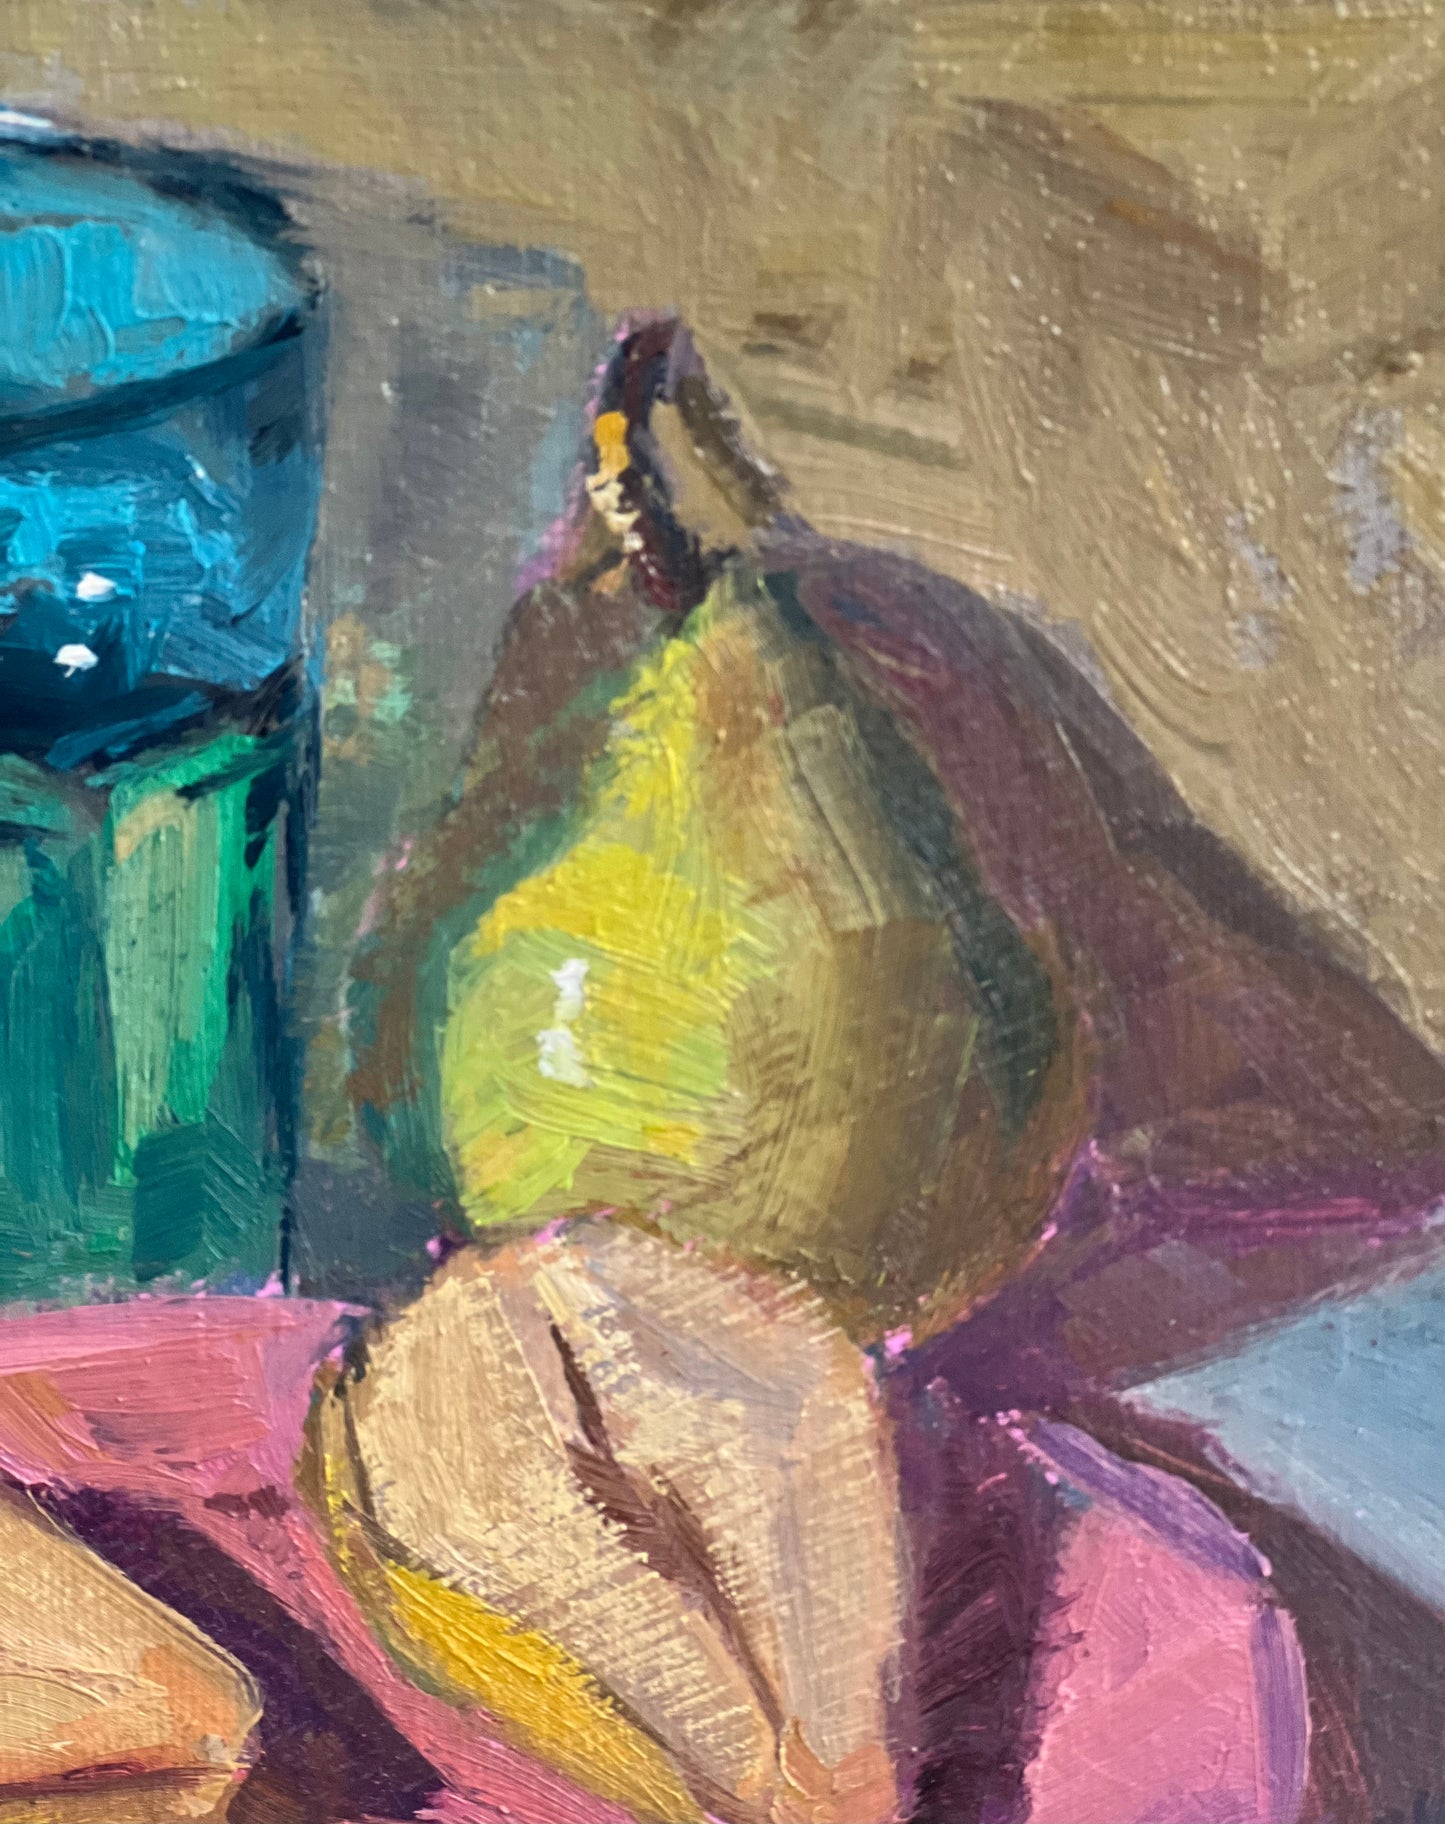 Pears with a blue glass - Small oil painting, 8 by 8 inches